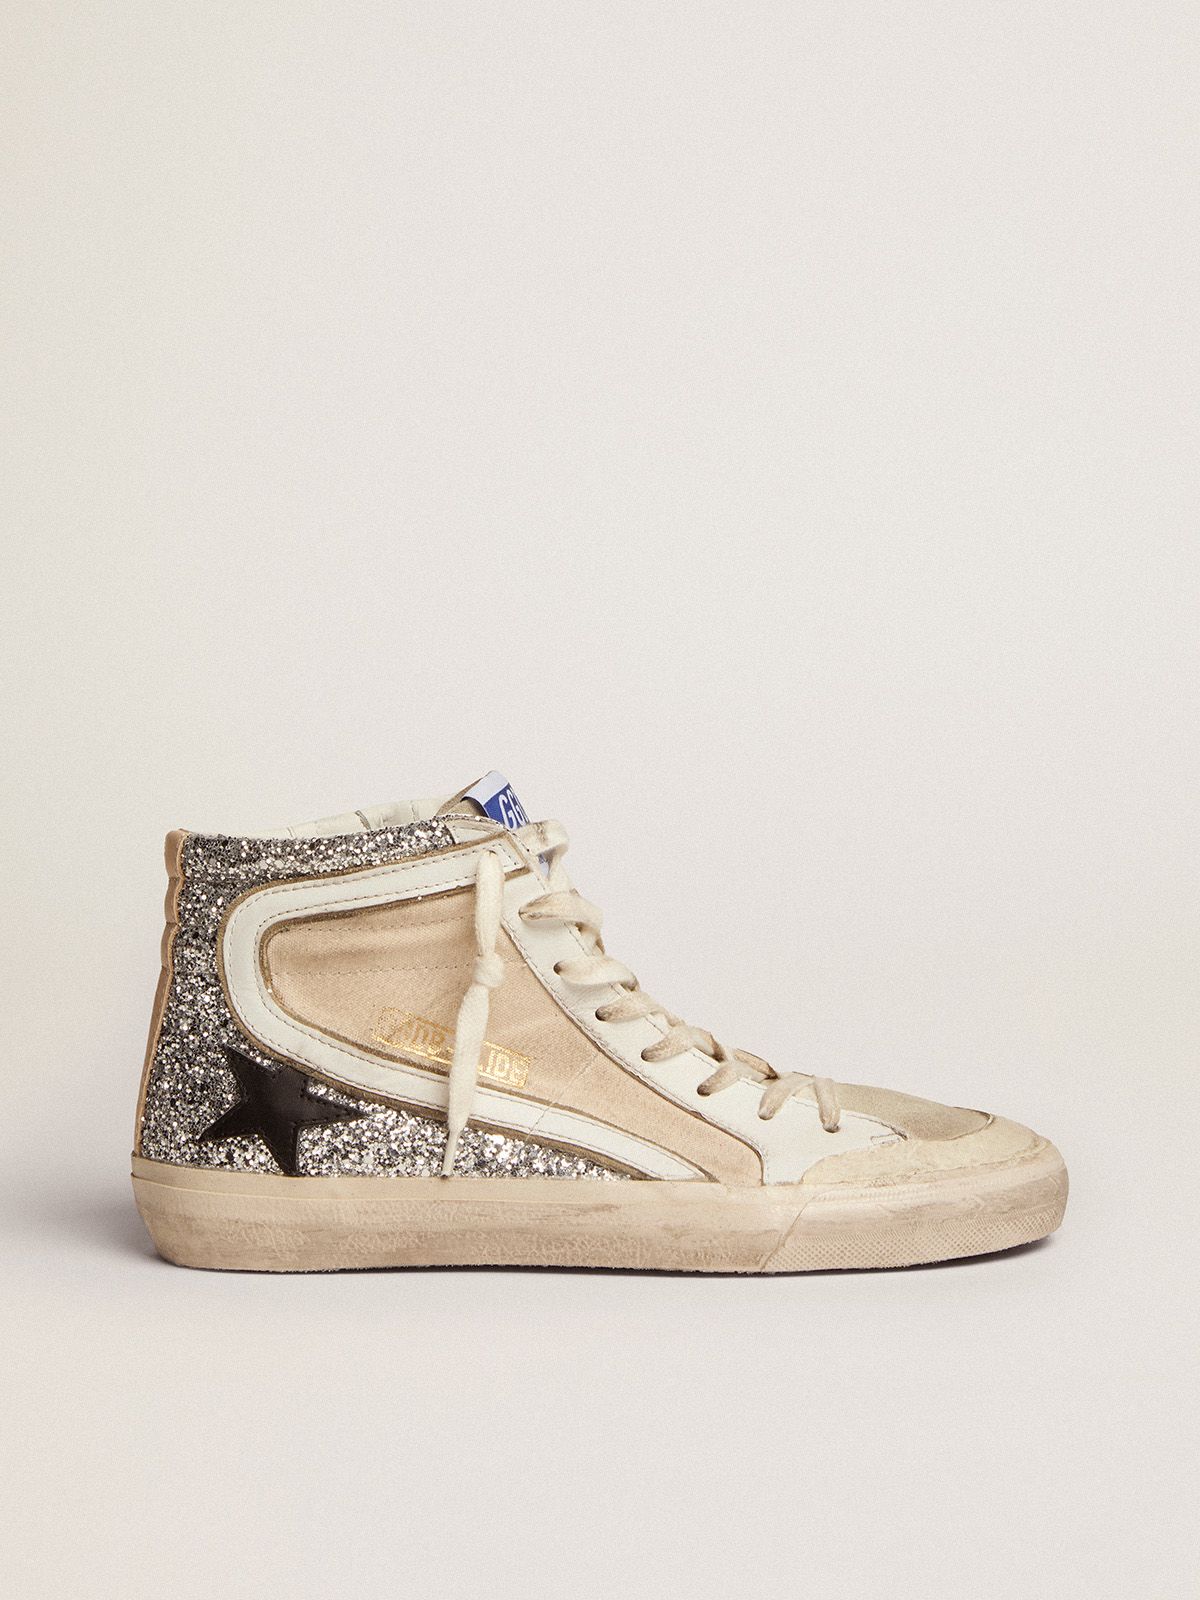 golden goose sneakers black in with silver leather cream-colored Penstar star glitter and Slide canvas